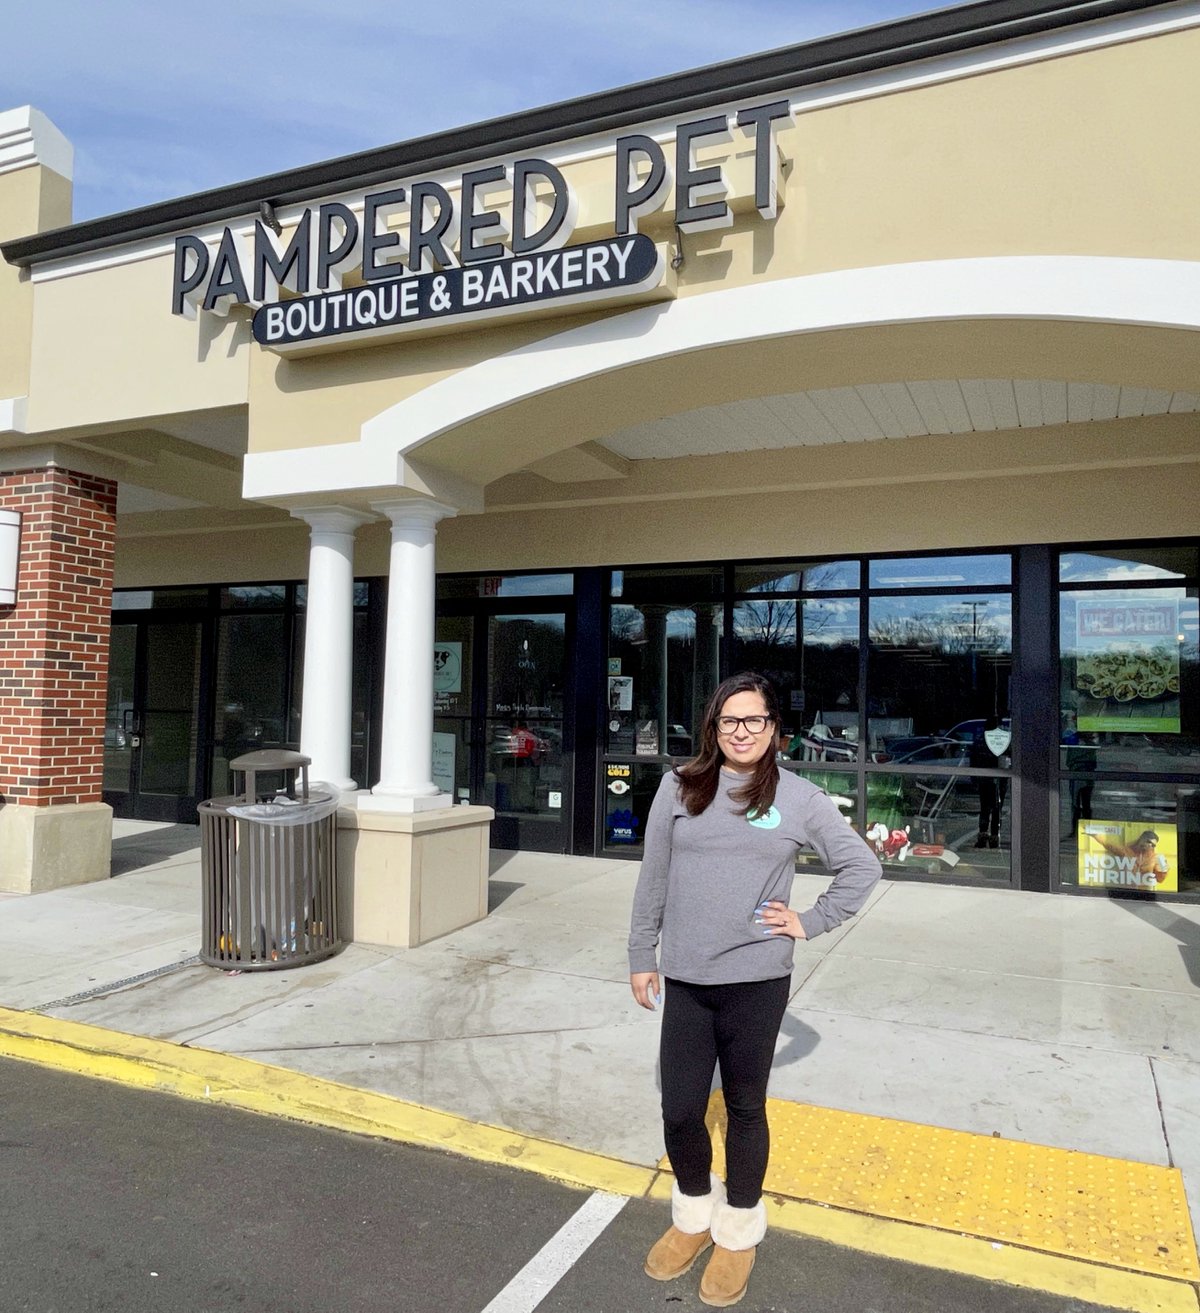 Belle View’s Pampered Pet Boutique and Barkery is Far more Than Just a Pet Retailer